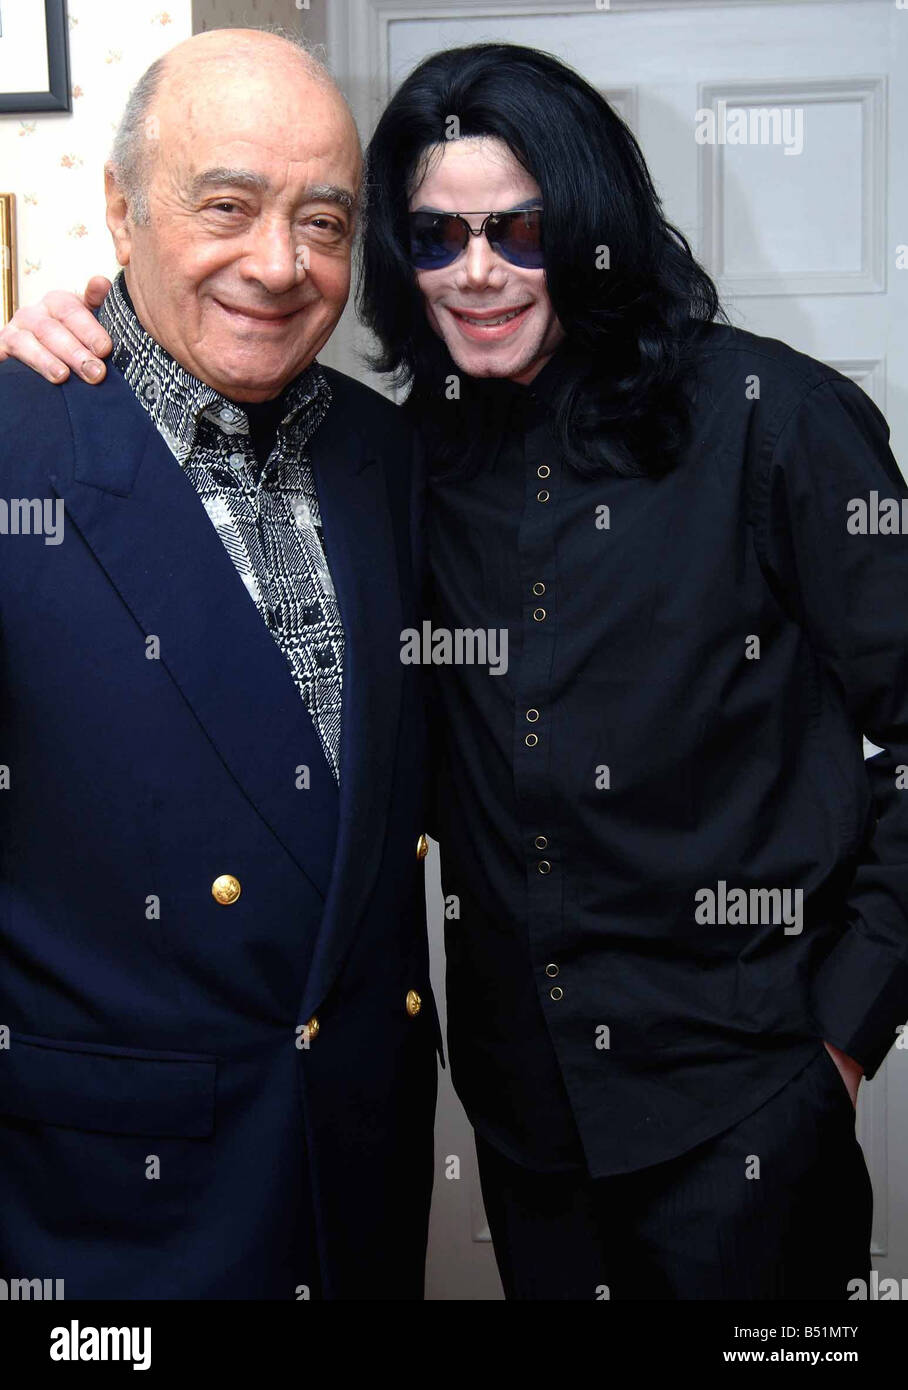 American singing star Michael Jackson at Harrods today to visit his good friend Mohammad Al Fayed May 2006 Stock Photo